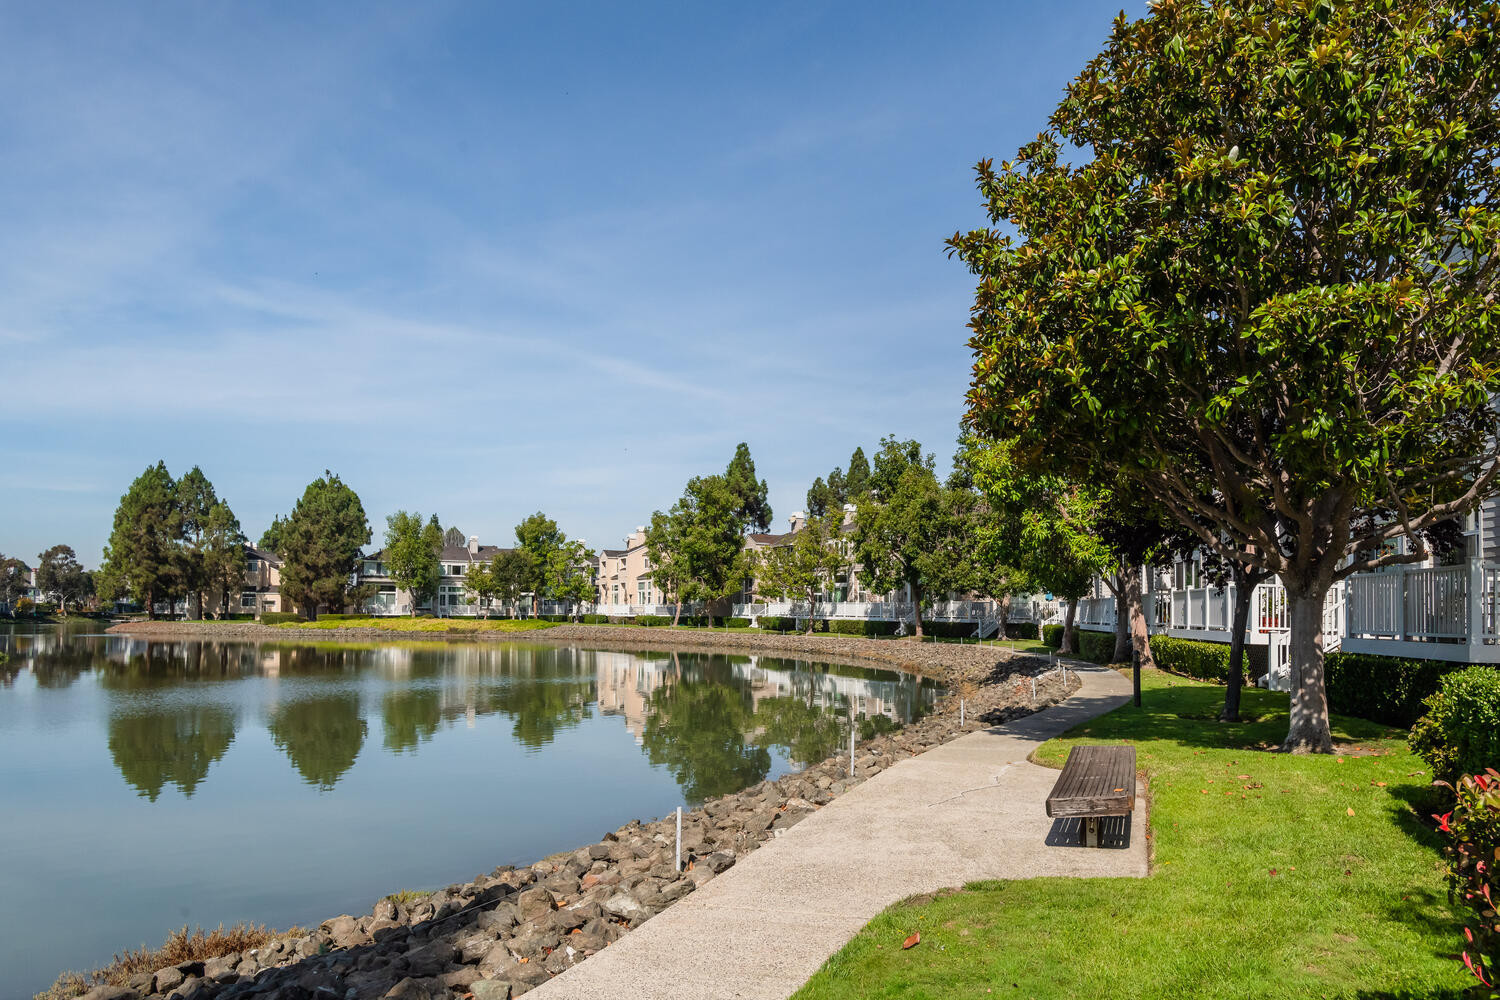 Park bench in Lighthouse Cove area in Redwood Shores.